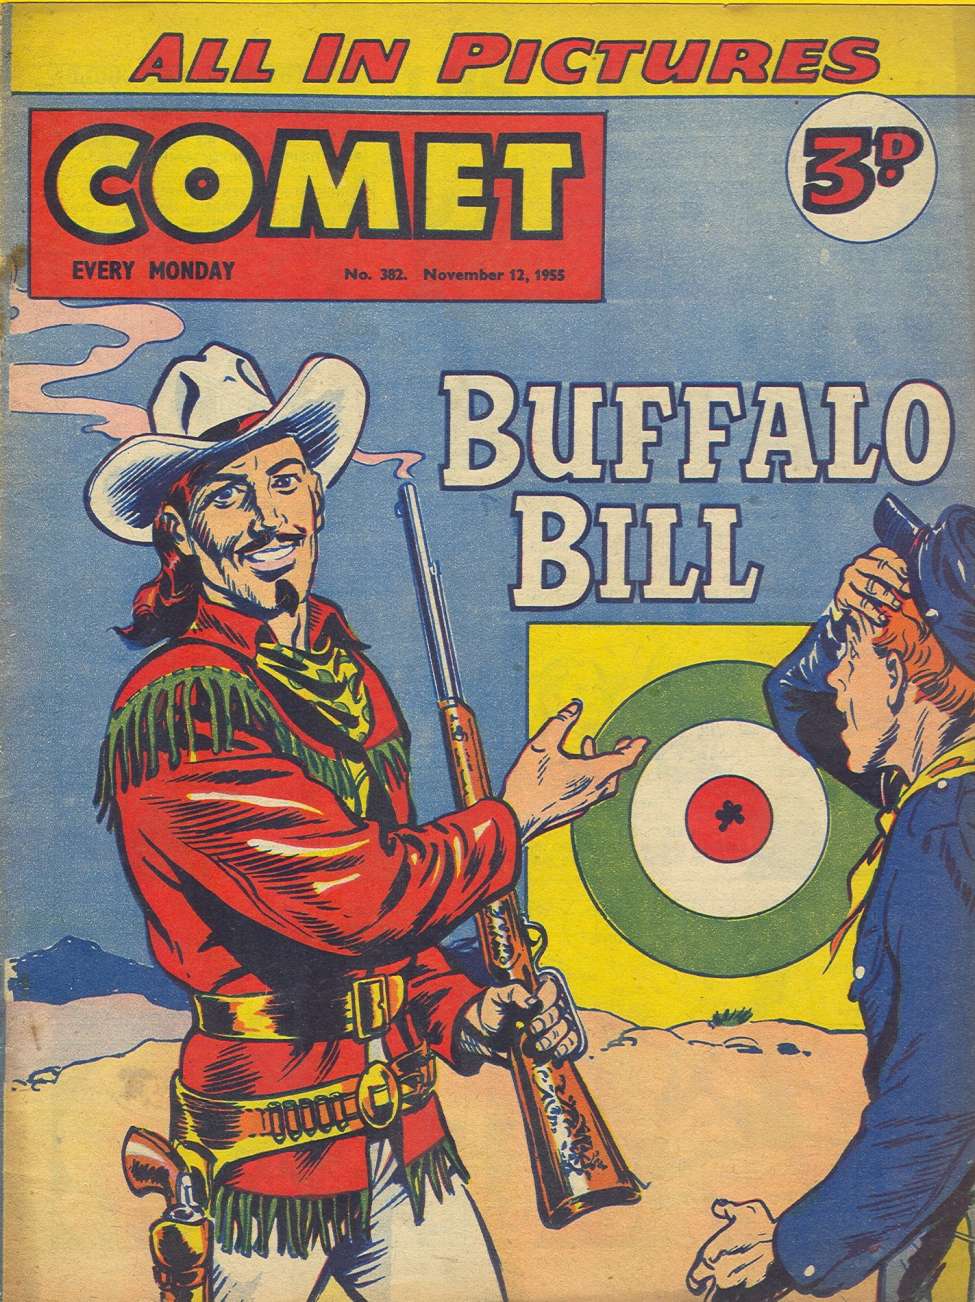 Book Cover For The Comet 382 - Version 1